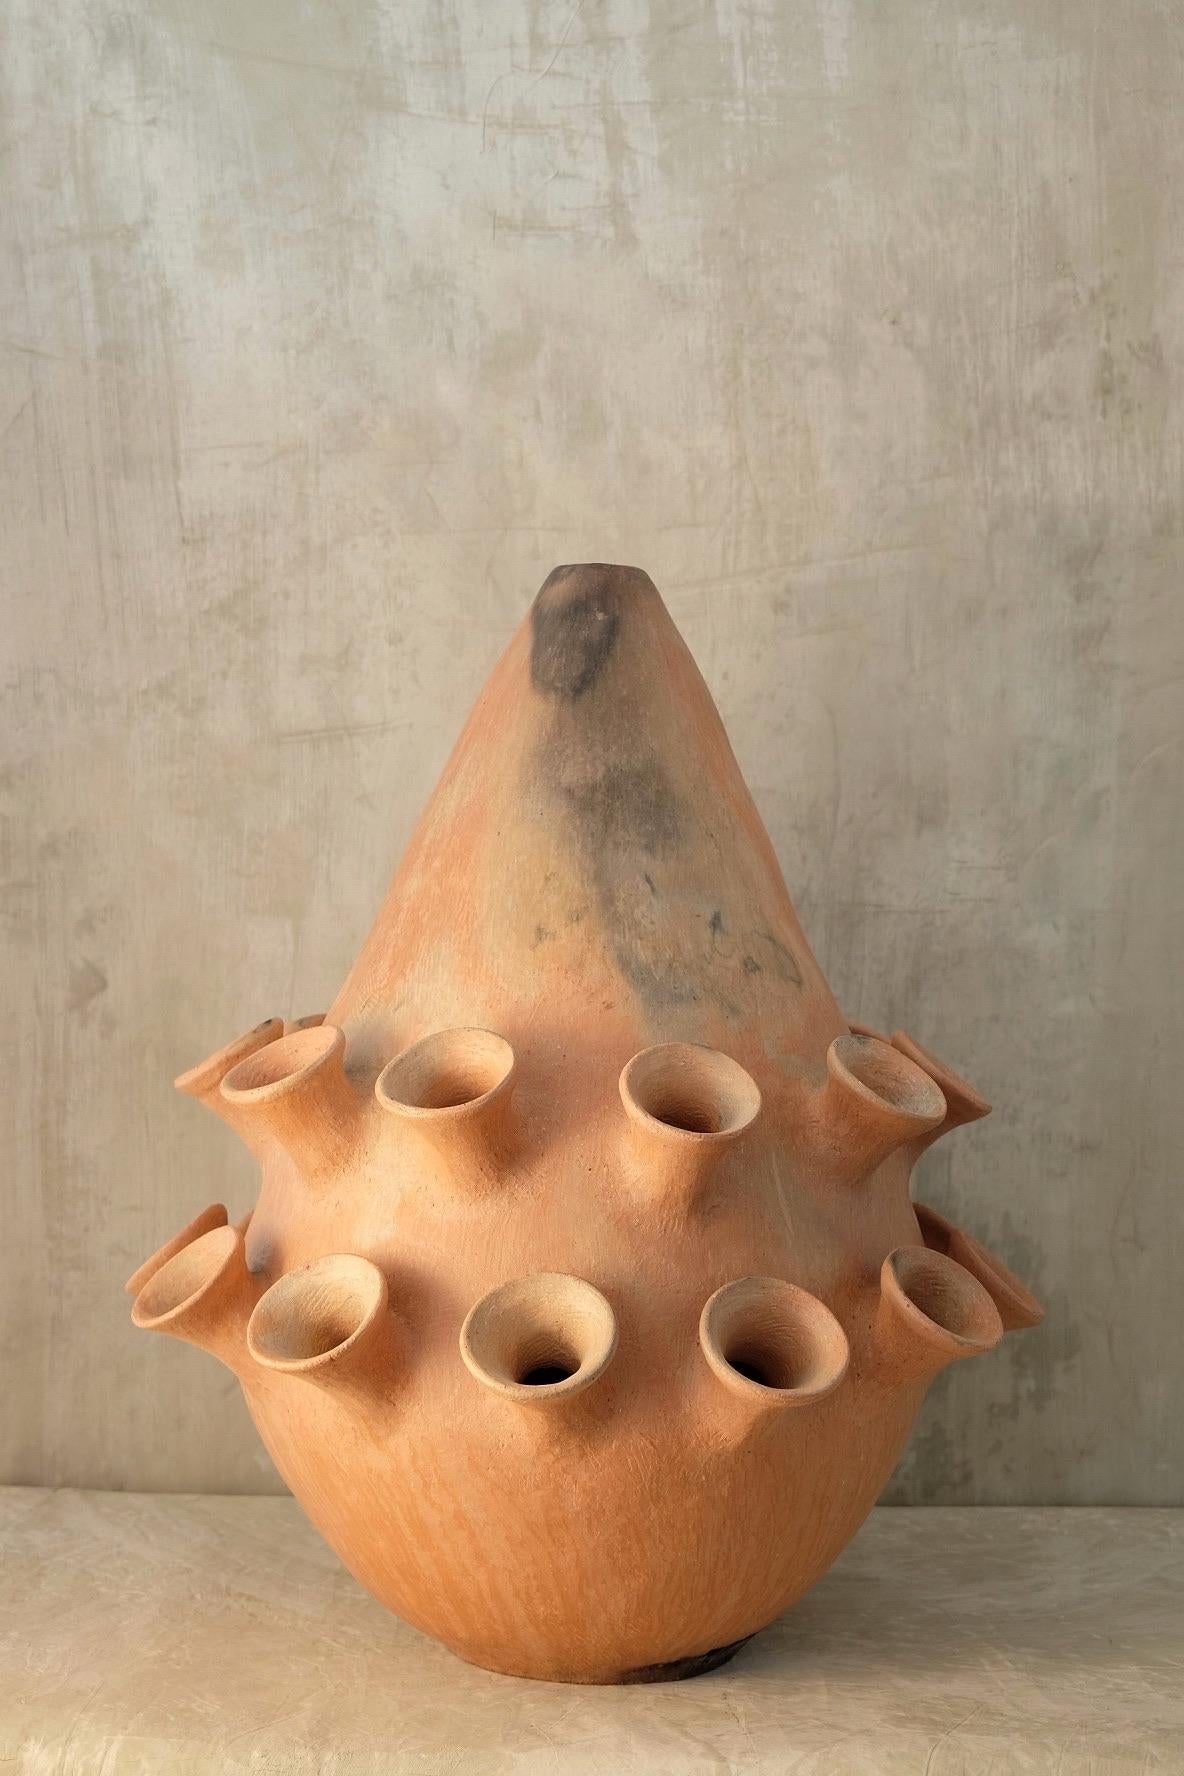 Tama two lines vase by Onora
Dimensions: D 45 x H 68 cm
Materials: Clay

Inspired in the traditional large format vessels used to store water, grains or prepare food, our playful reinterpretation of Mixe pottery plays homage to this region’s 21